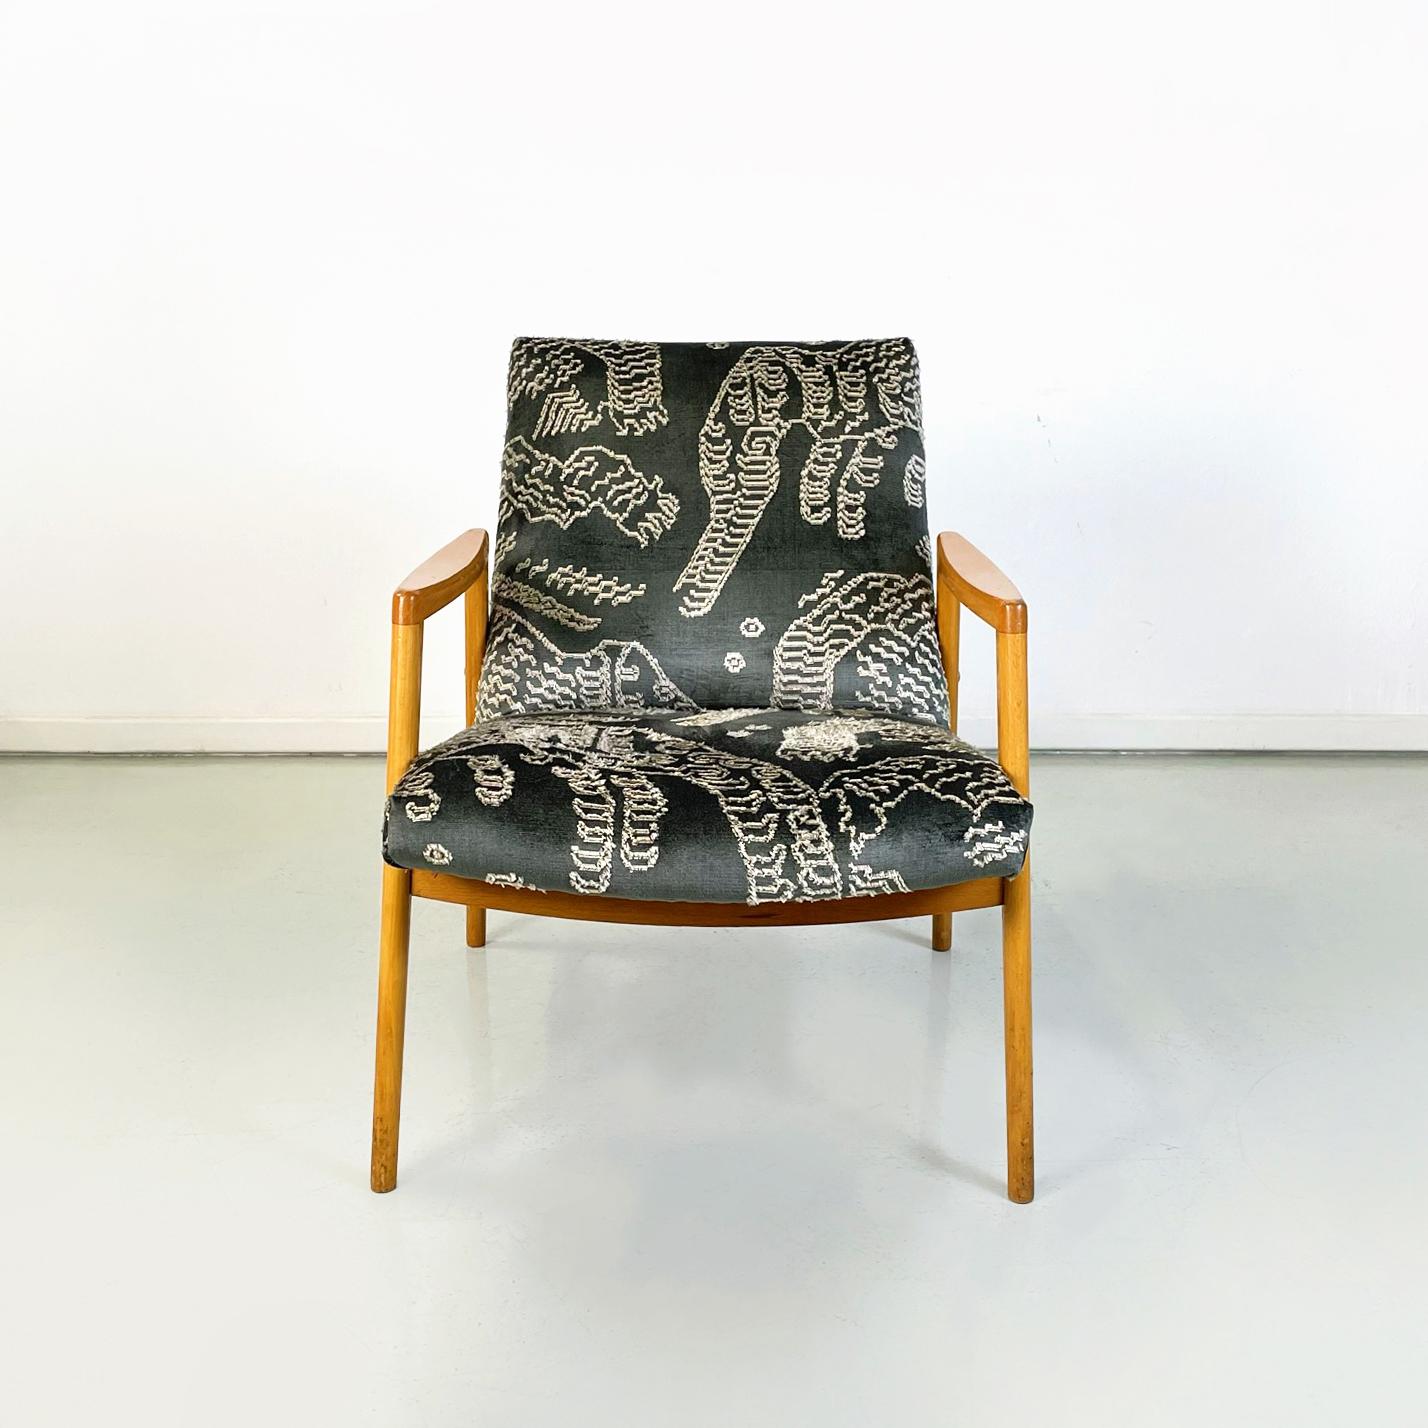 North Europa midcentury Armchair in wood, green and white velvet, 1960s
Armchair with seat and back, padded and covered in green-gray velvet fabric with white design. The structure of the armchair is in solid wood with shaped armrests.
1960s.